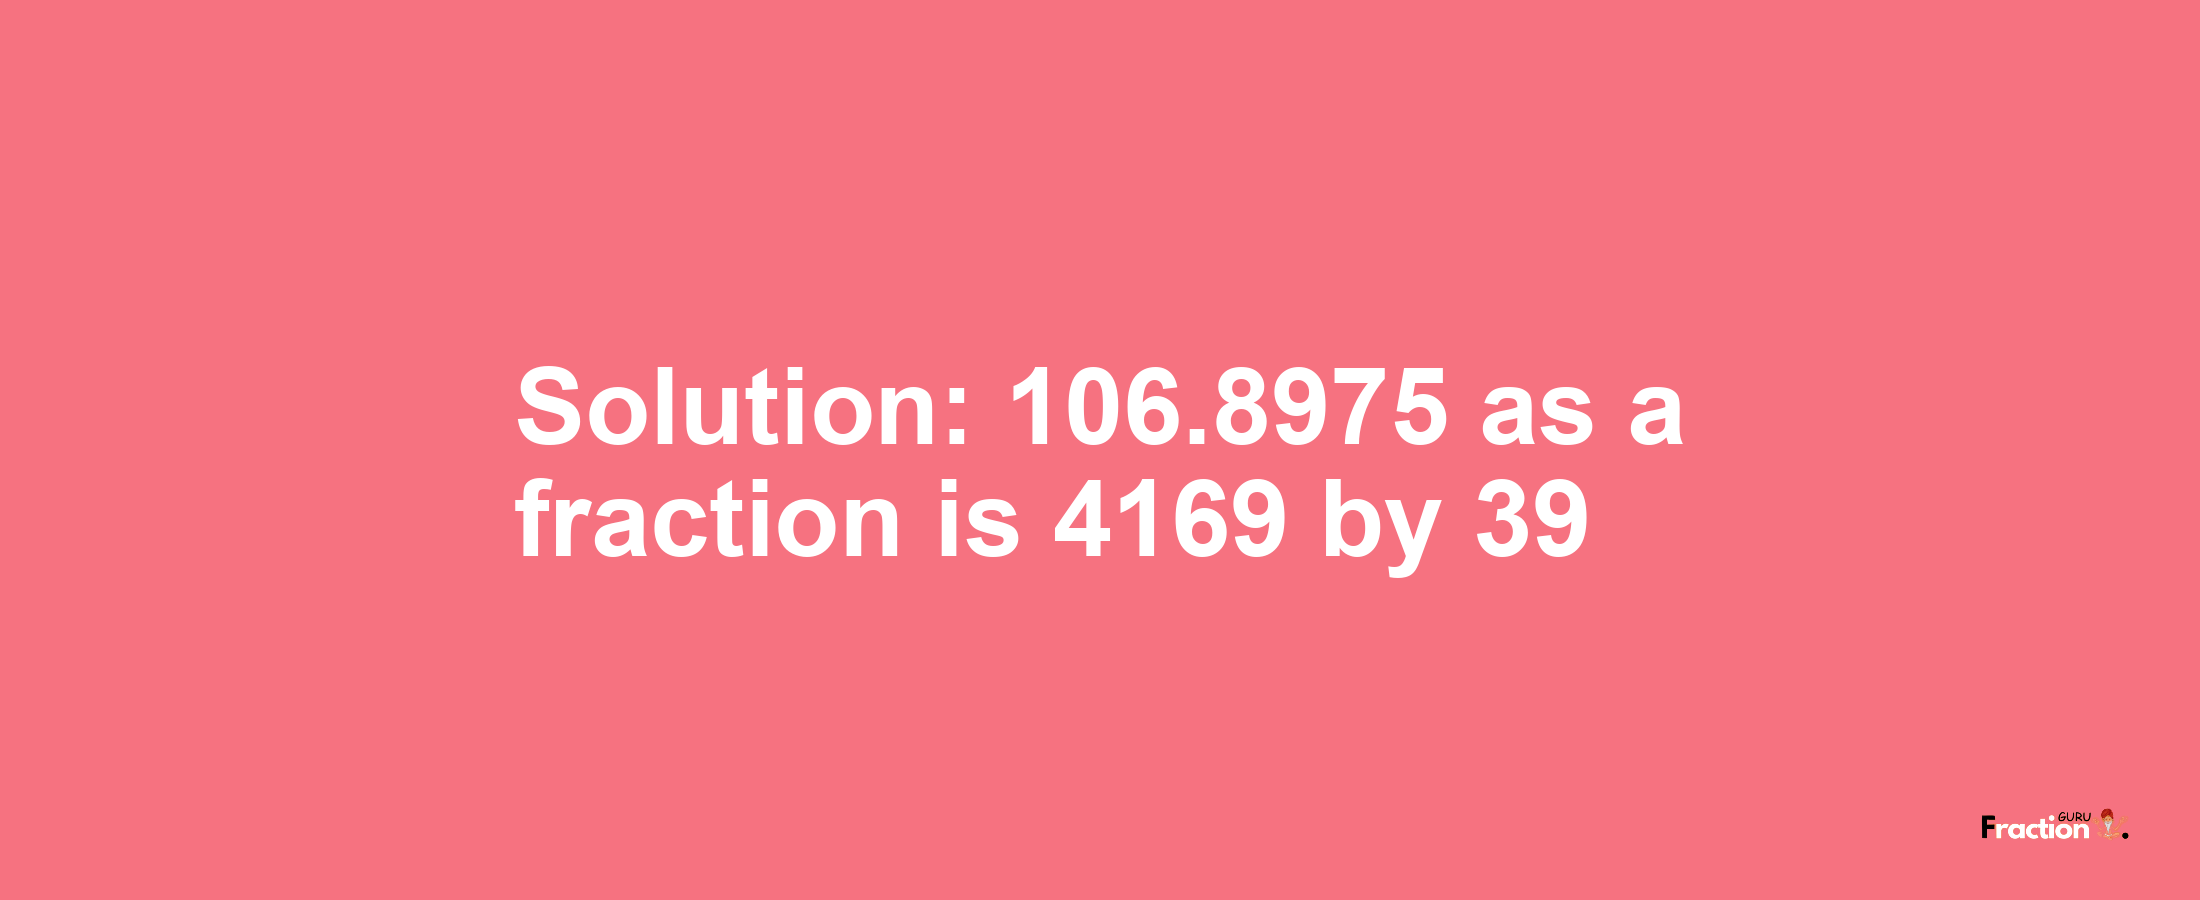 Solution:106.8975 as a fraction is 4169/39